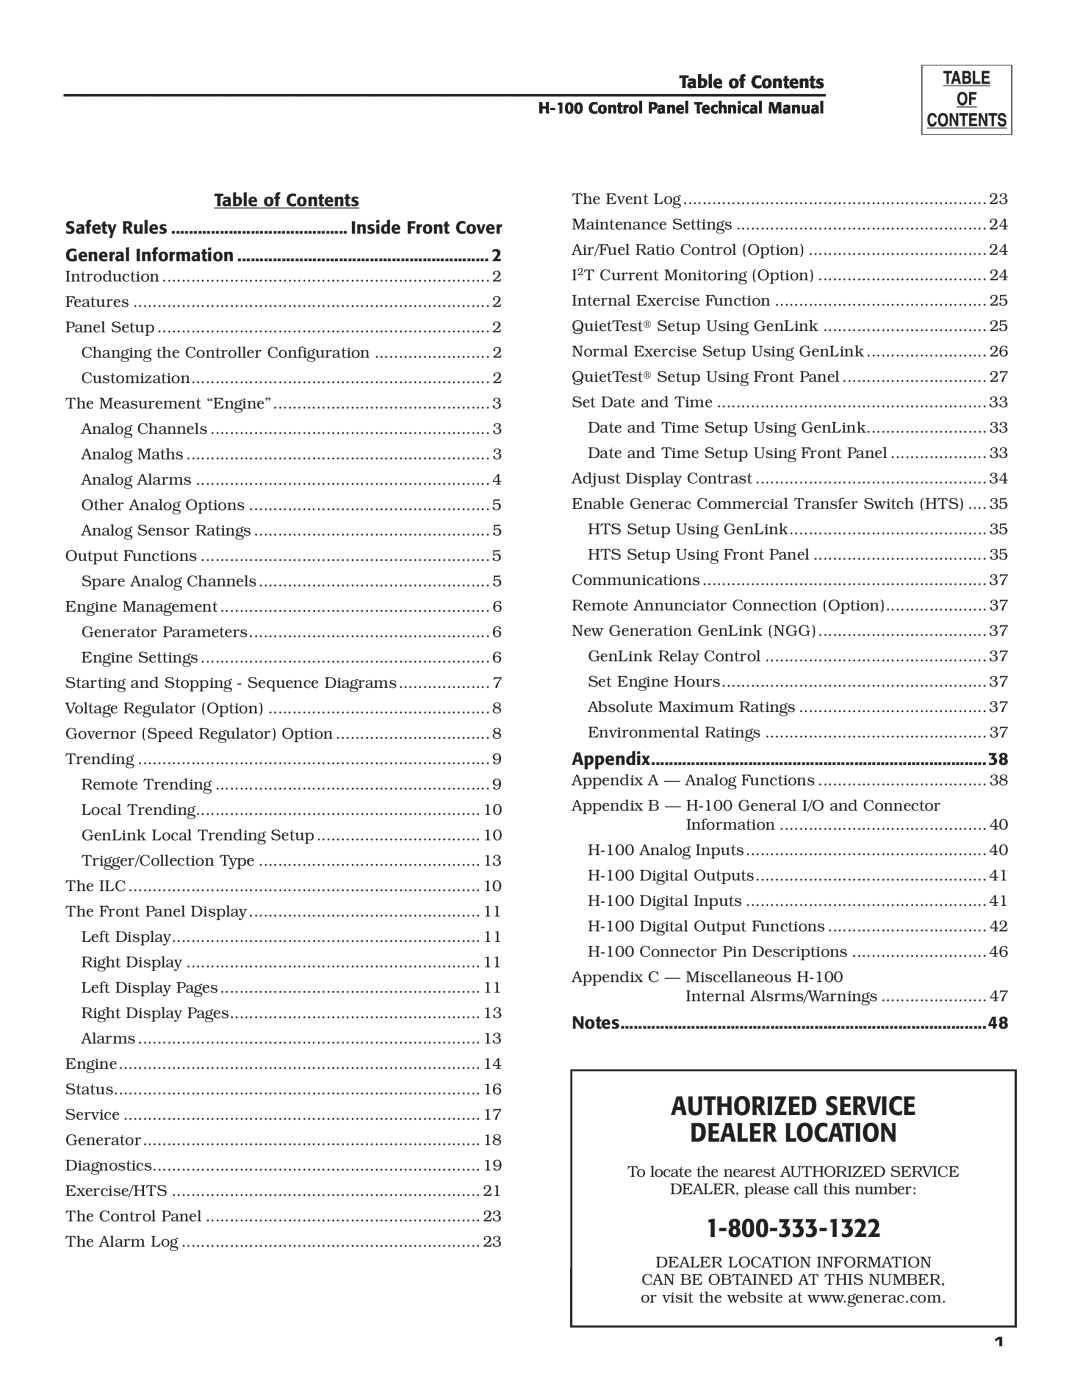 Generac Power Systems H-100 Authorized Service Dealer Location, Table of Contents, Inside Front Cover, Safety Rules 